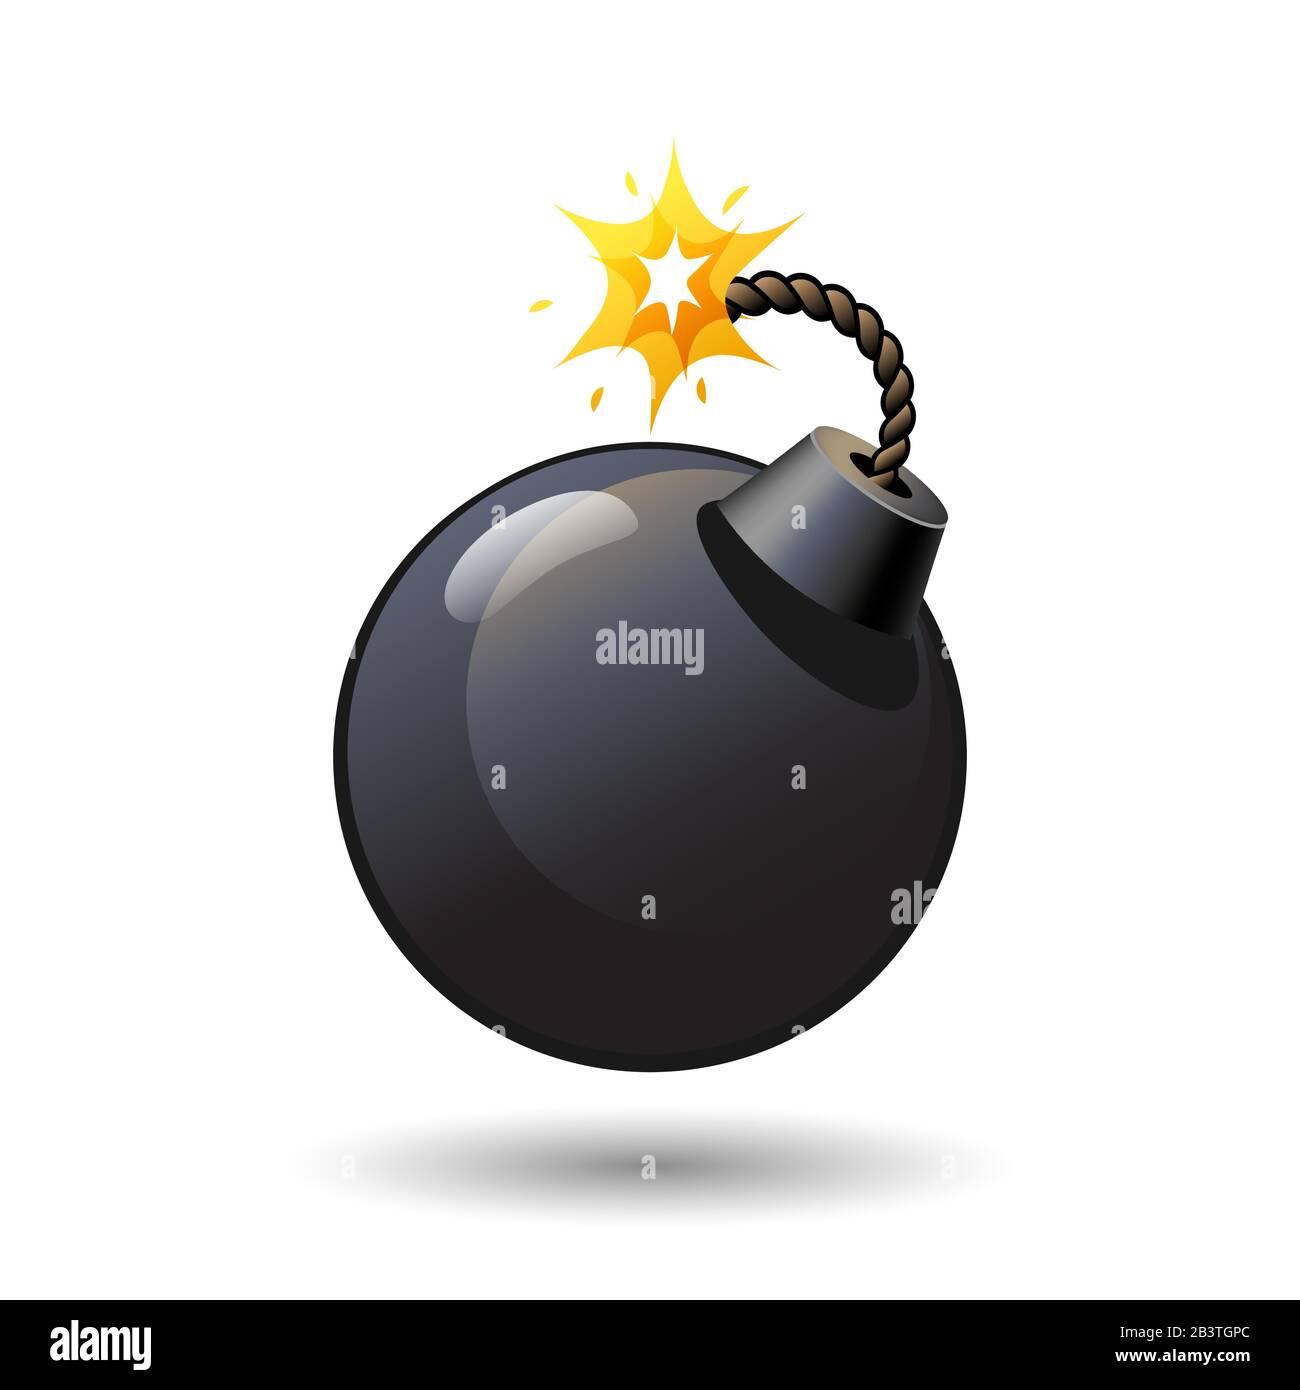 Black round bomb with burning fuse icon isolated on white background, arms, weapon, vector illustration. Stock Vector